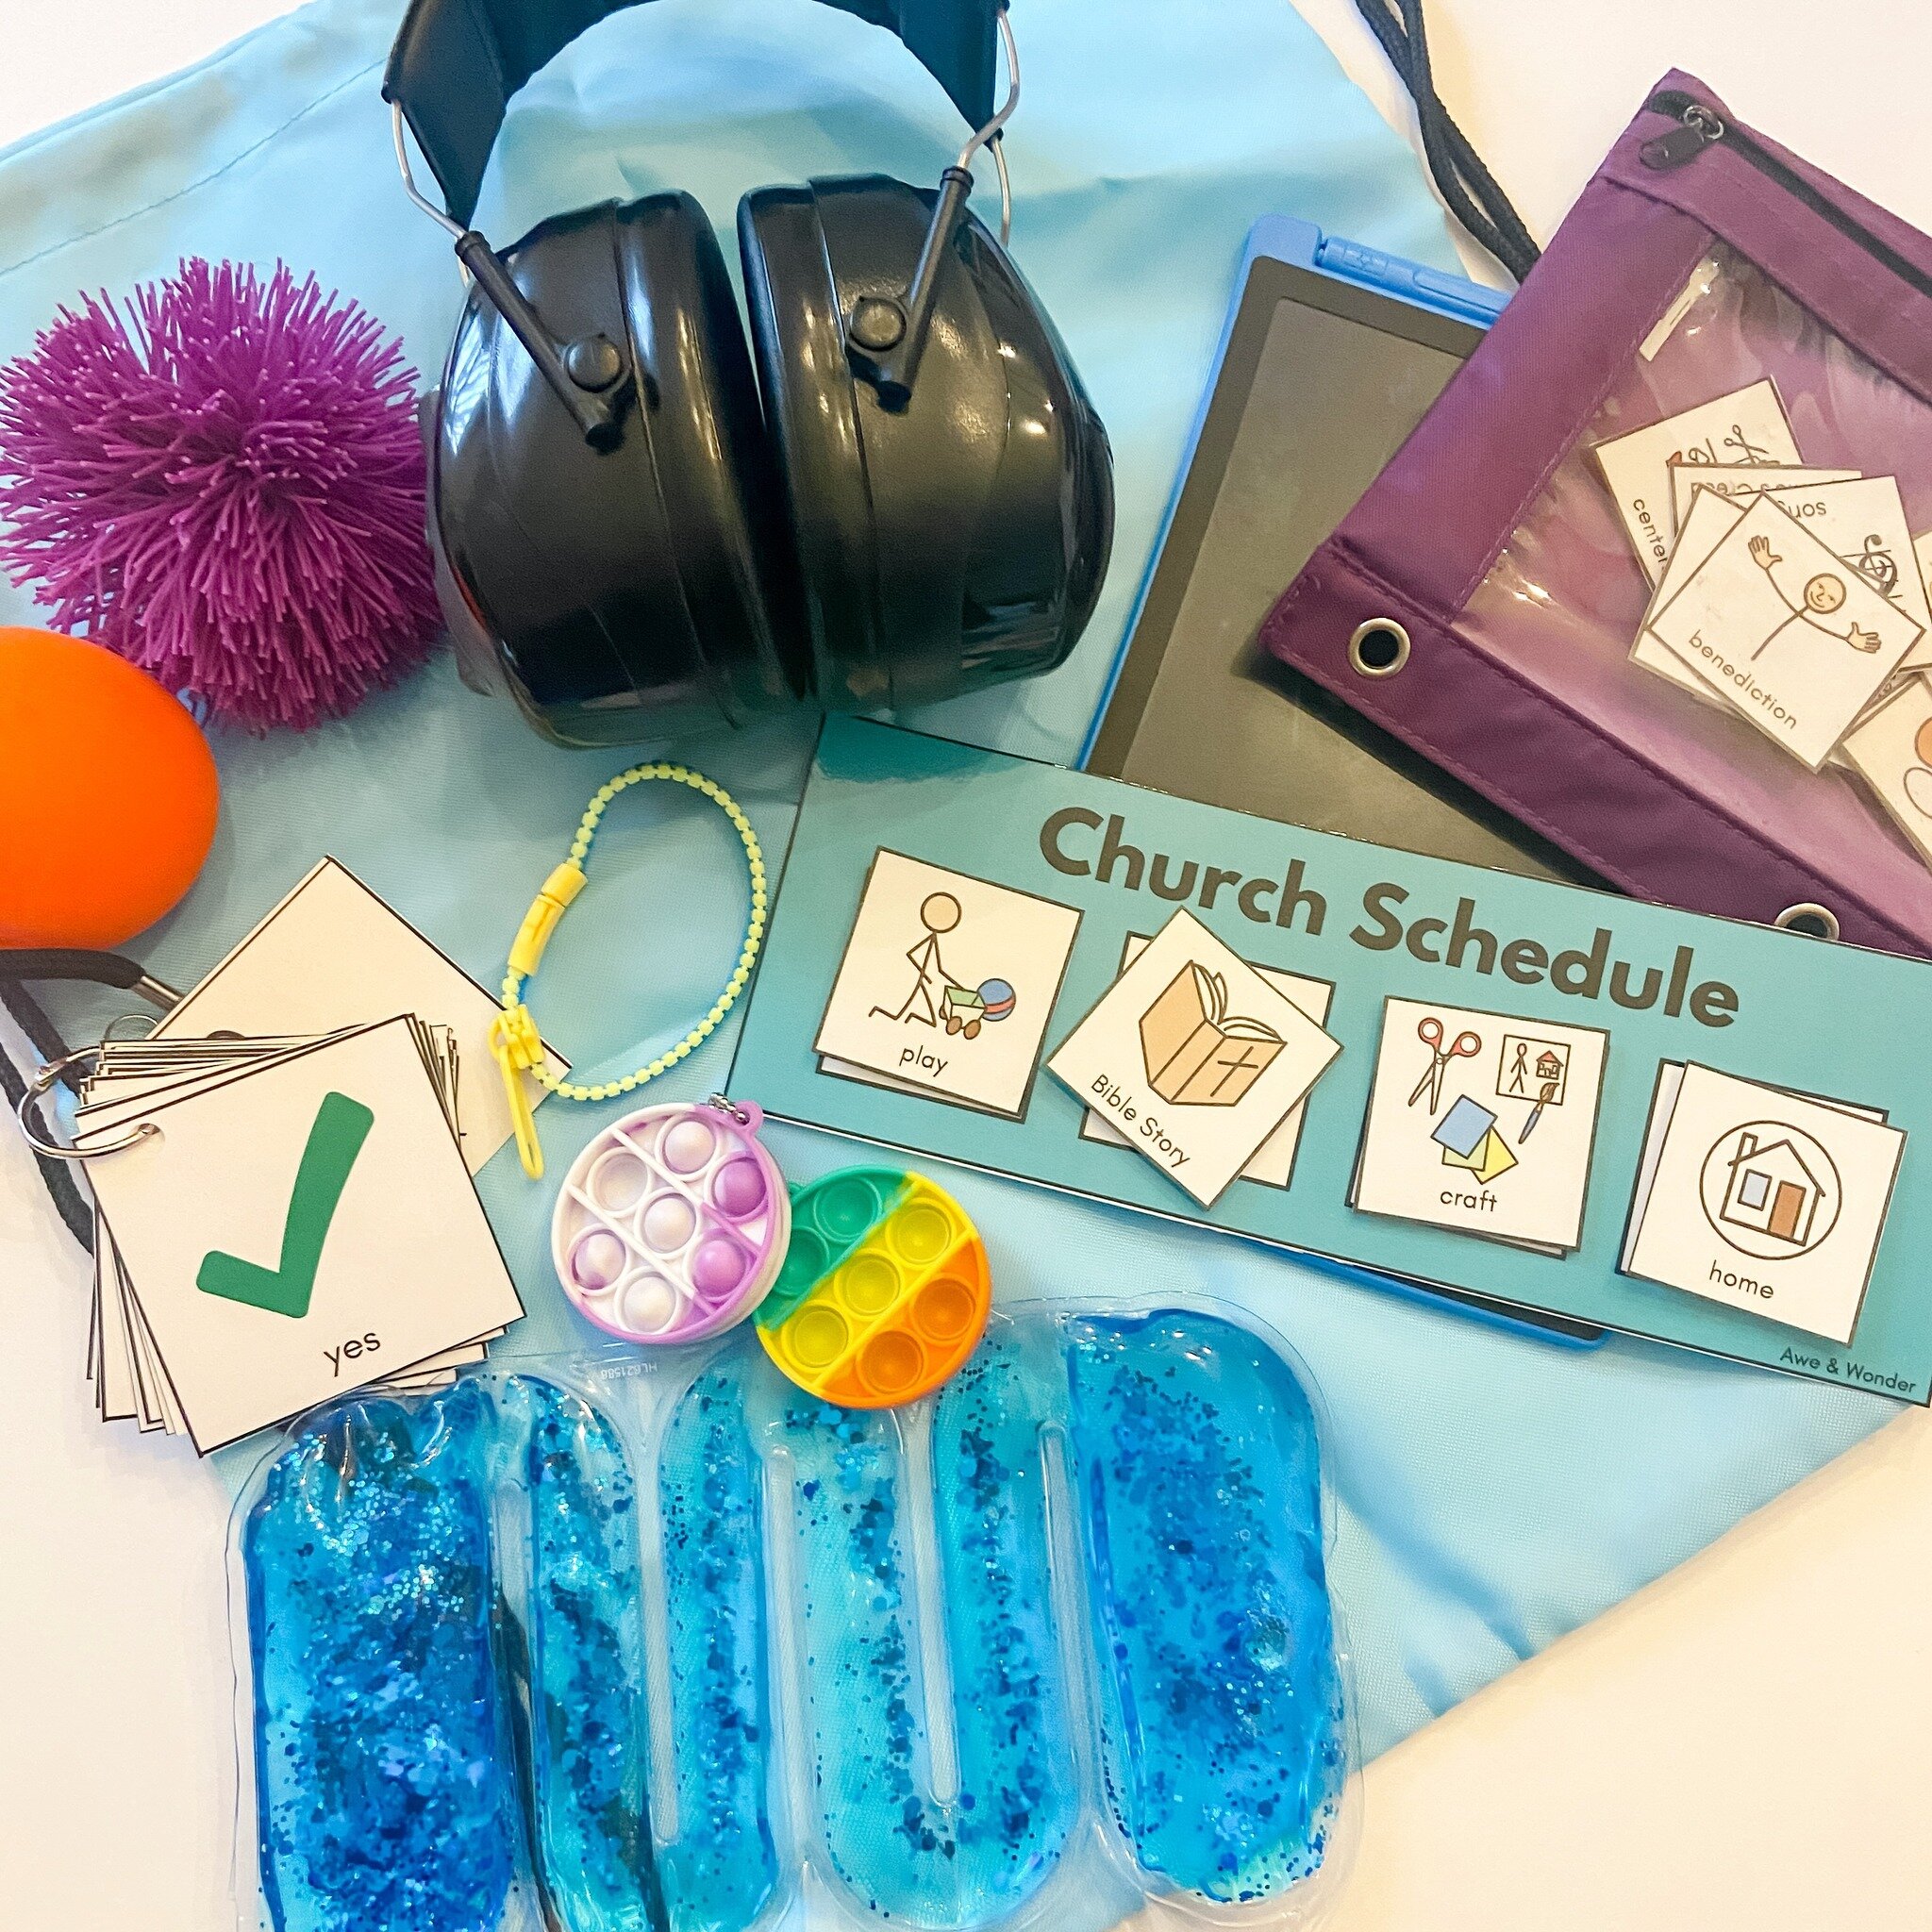 Sensory supports bags (or Buddy Bags) give volunteers and ministry leaders a bag of tools to support students with sensory needs in children&rsquo;s ministry environments. 

Awe &amp; Wonder has visual support lanyard cards and church visual schedule